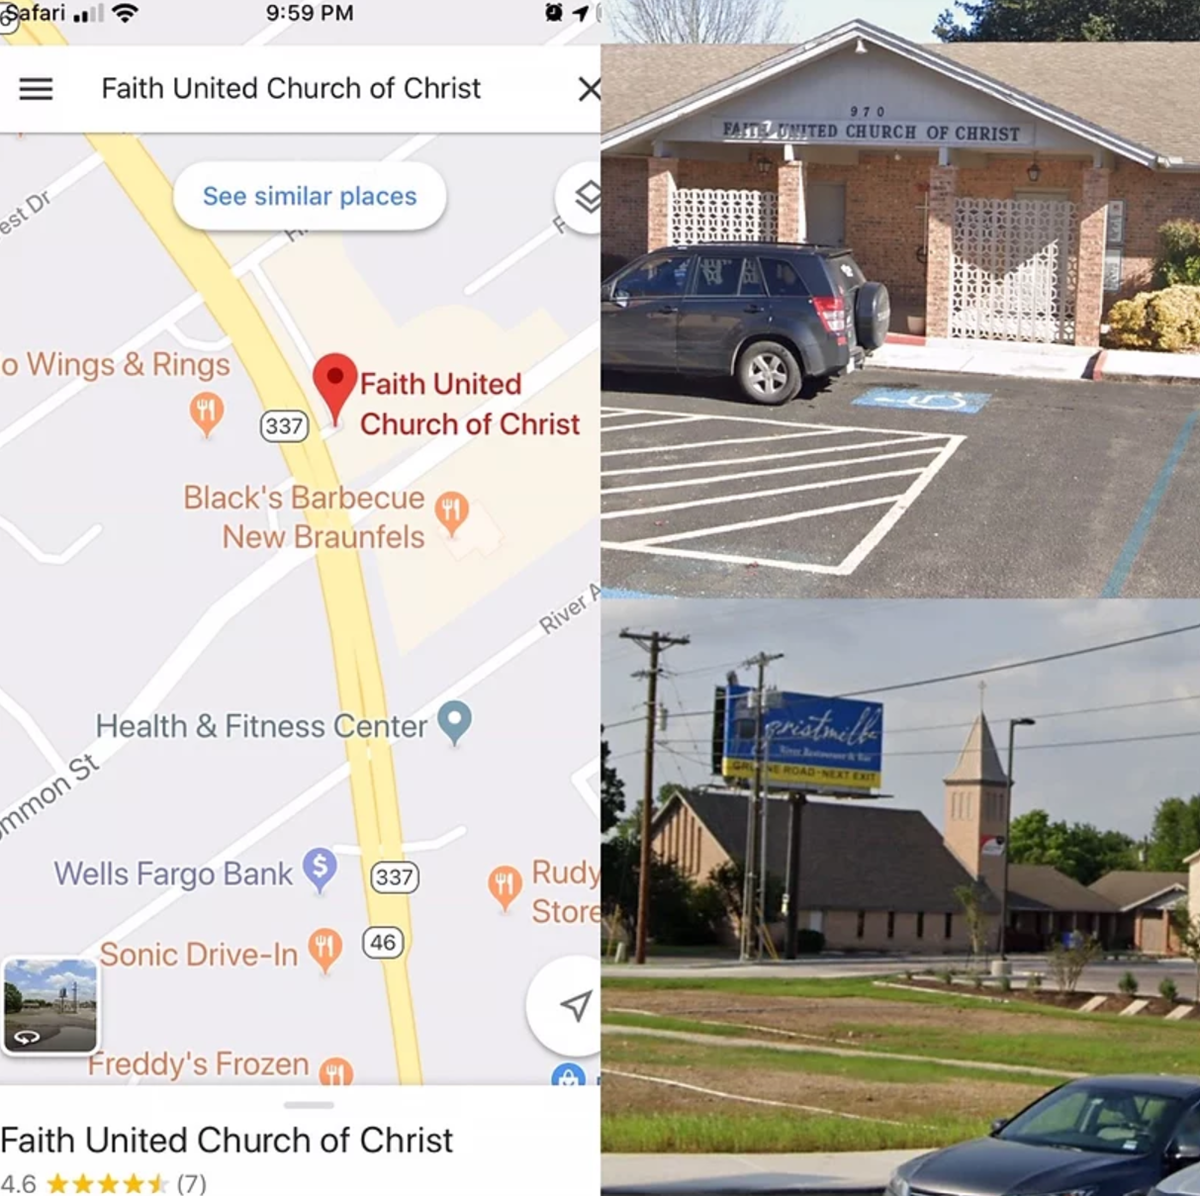 Google Map and Two Photos of Exterior of Faith Chuch Complex